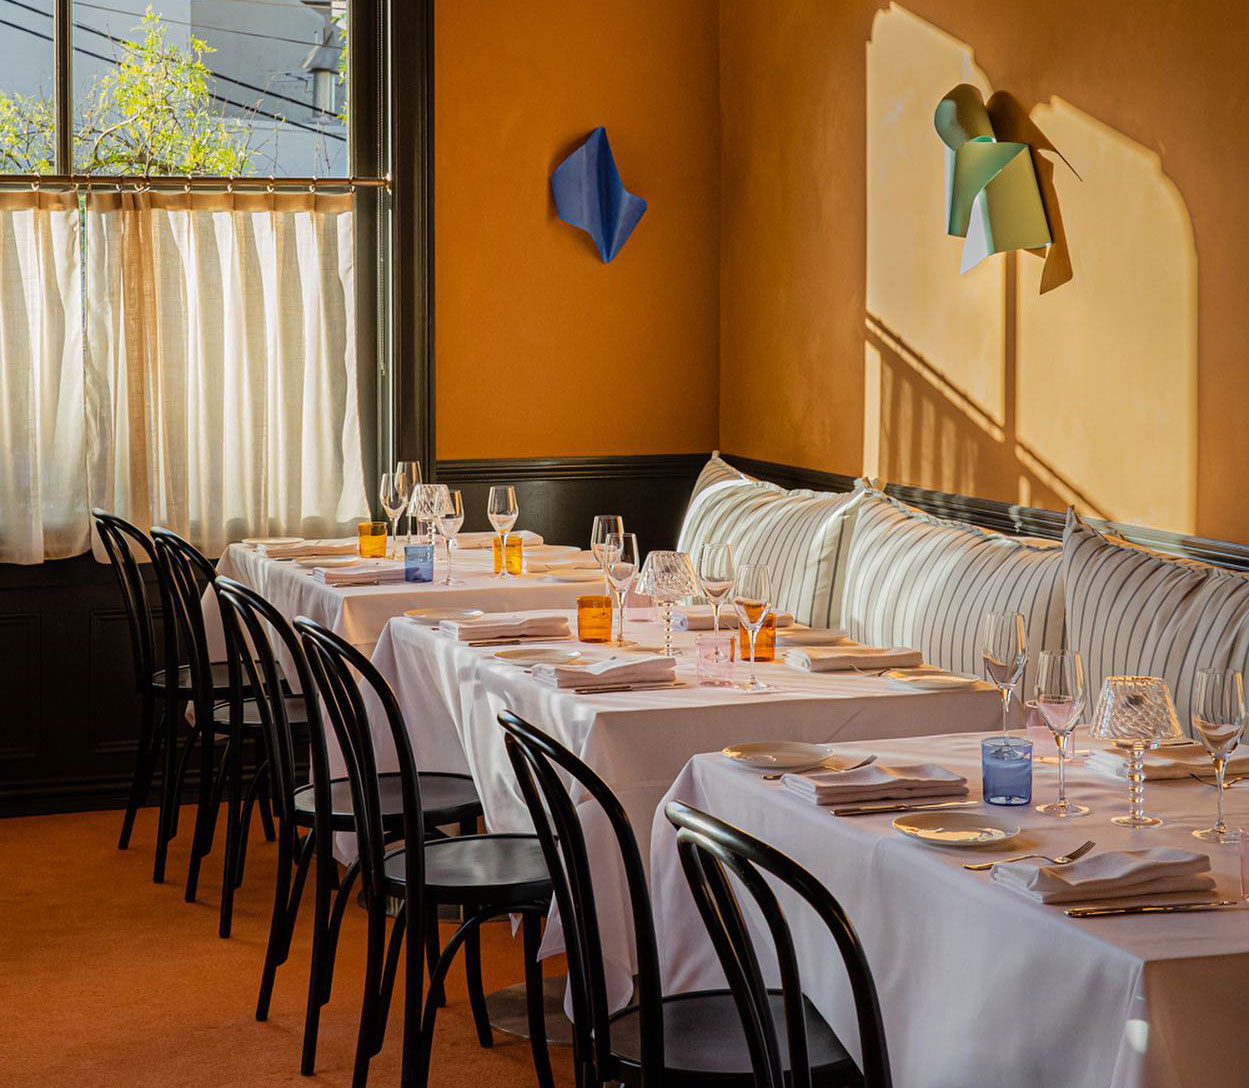 The bright caramel hued dining room at Ursula's, one of the best restaurants in Sydney